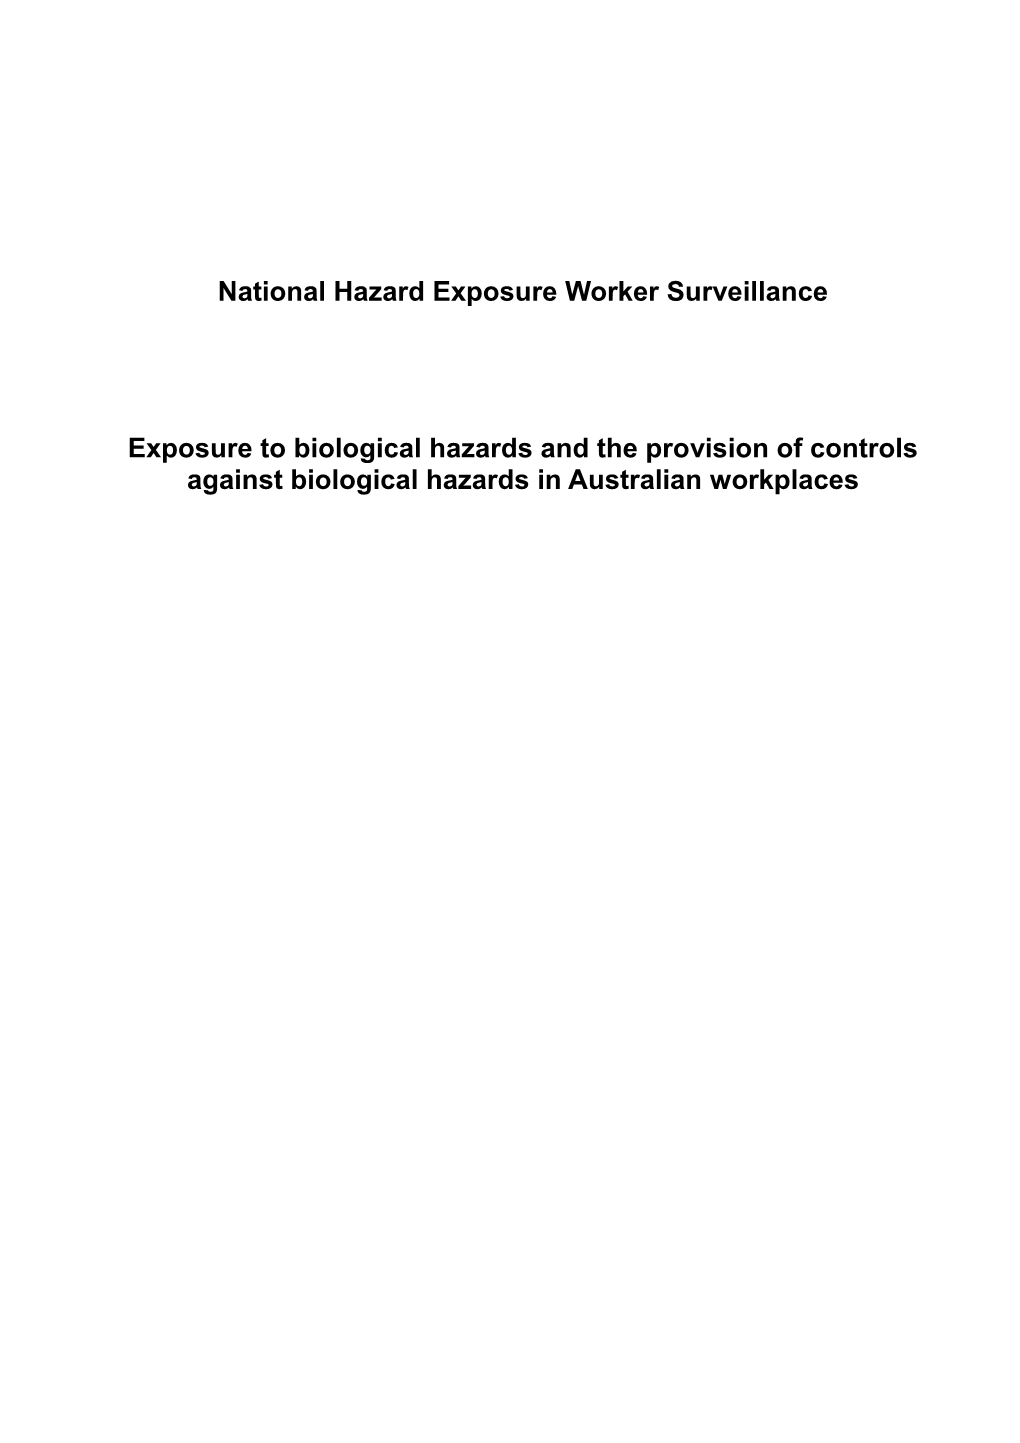 National Hazard Exposure Worker Surveillance: Exposure to Biological Hazards and the Provision